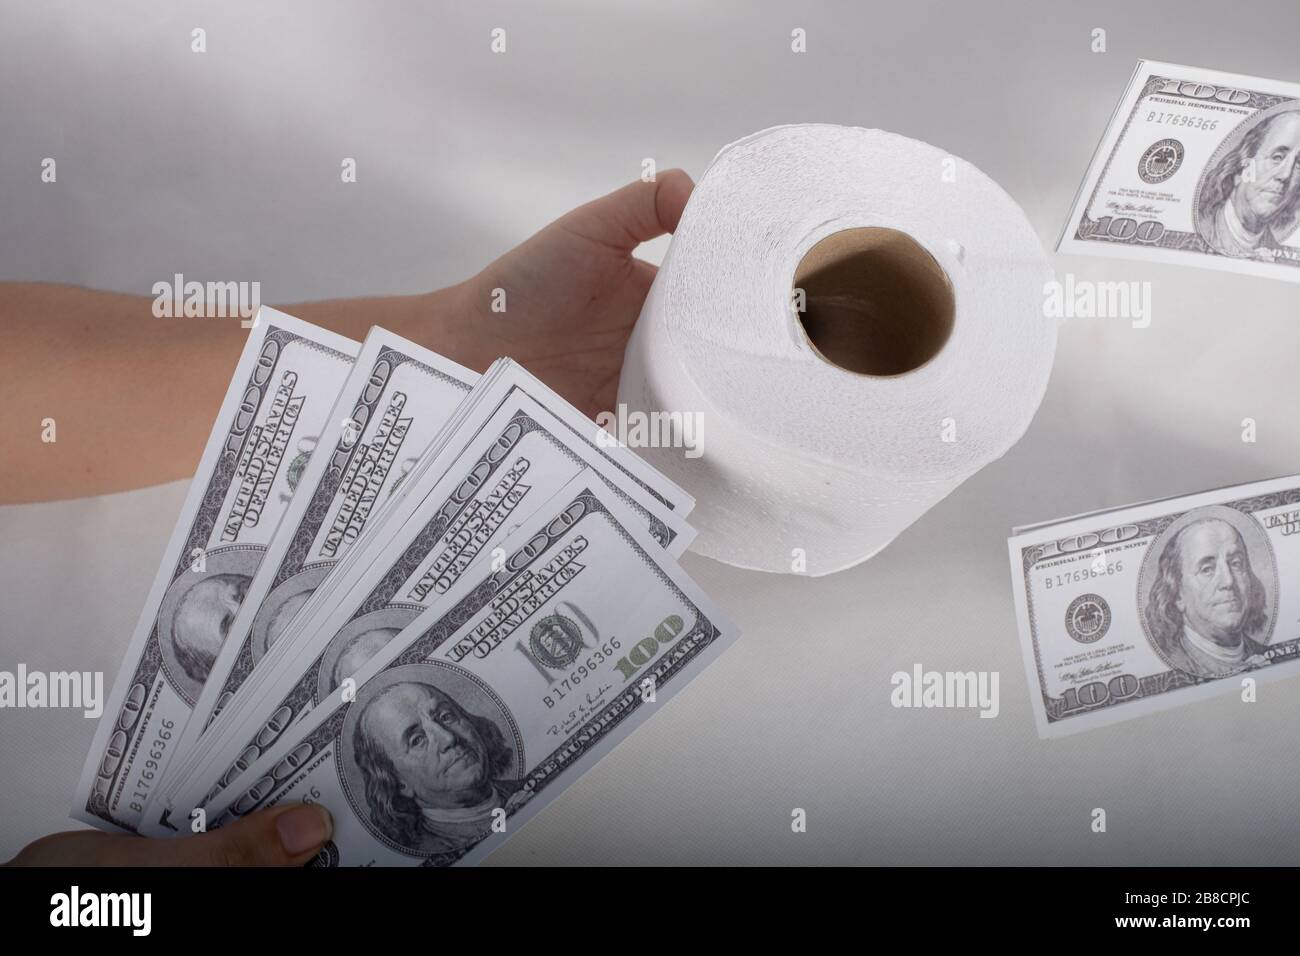 Close up sell-buy tissue, handholds toilet paper tissue and money of 100 US  dollars banknote a lot of Stock Photo - Alamy